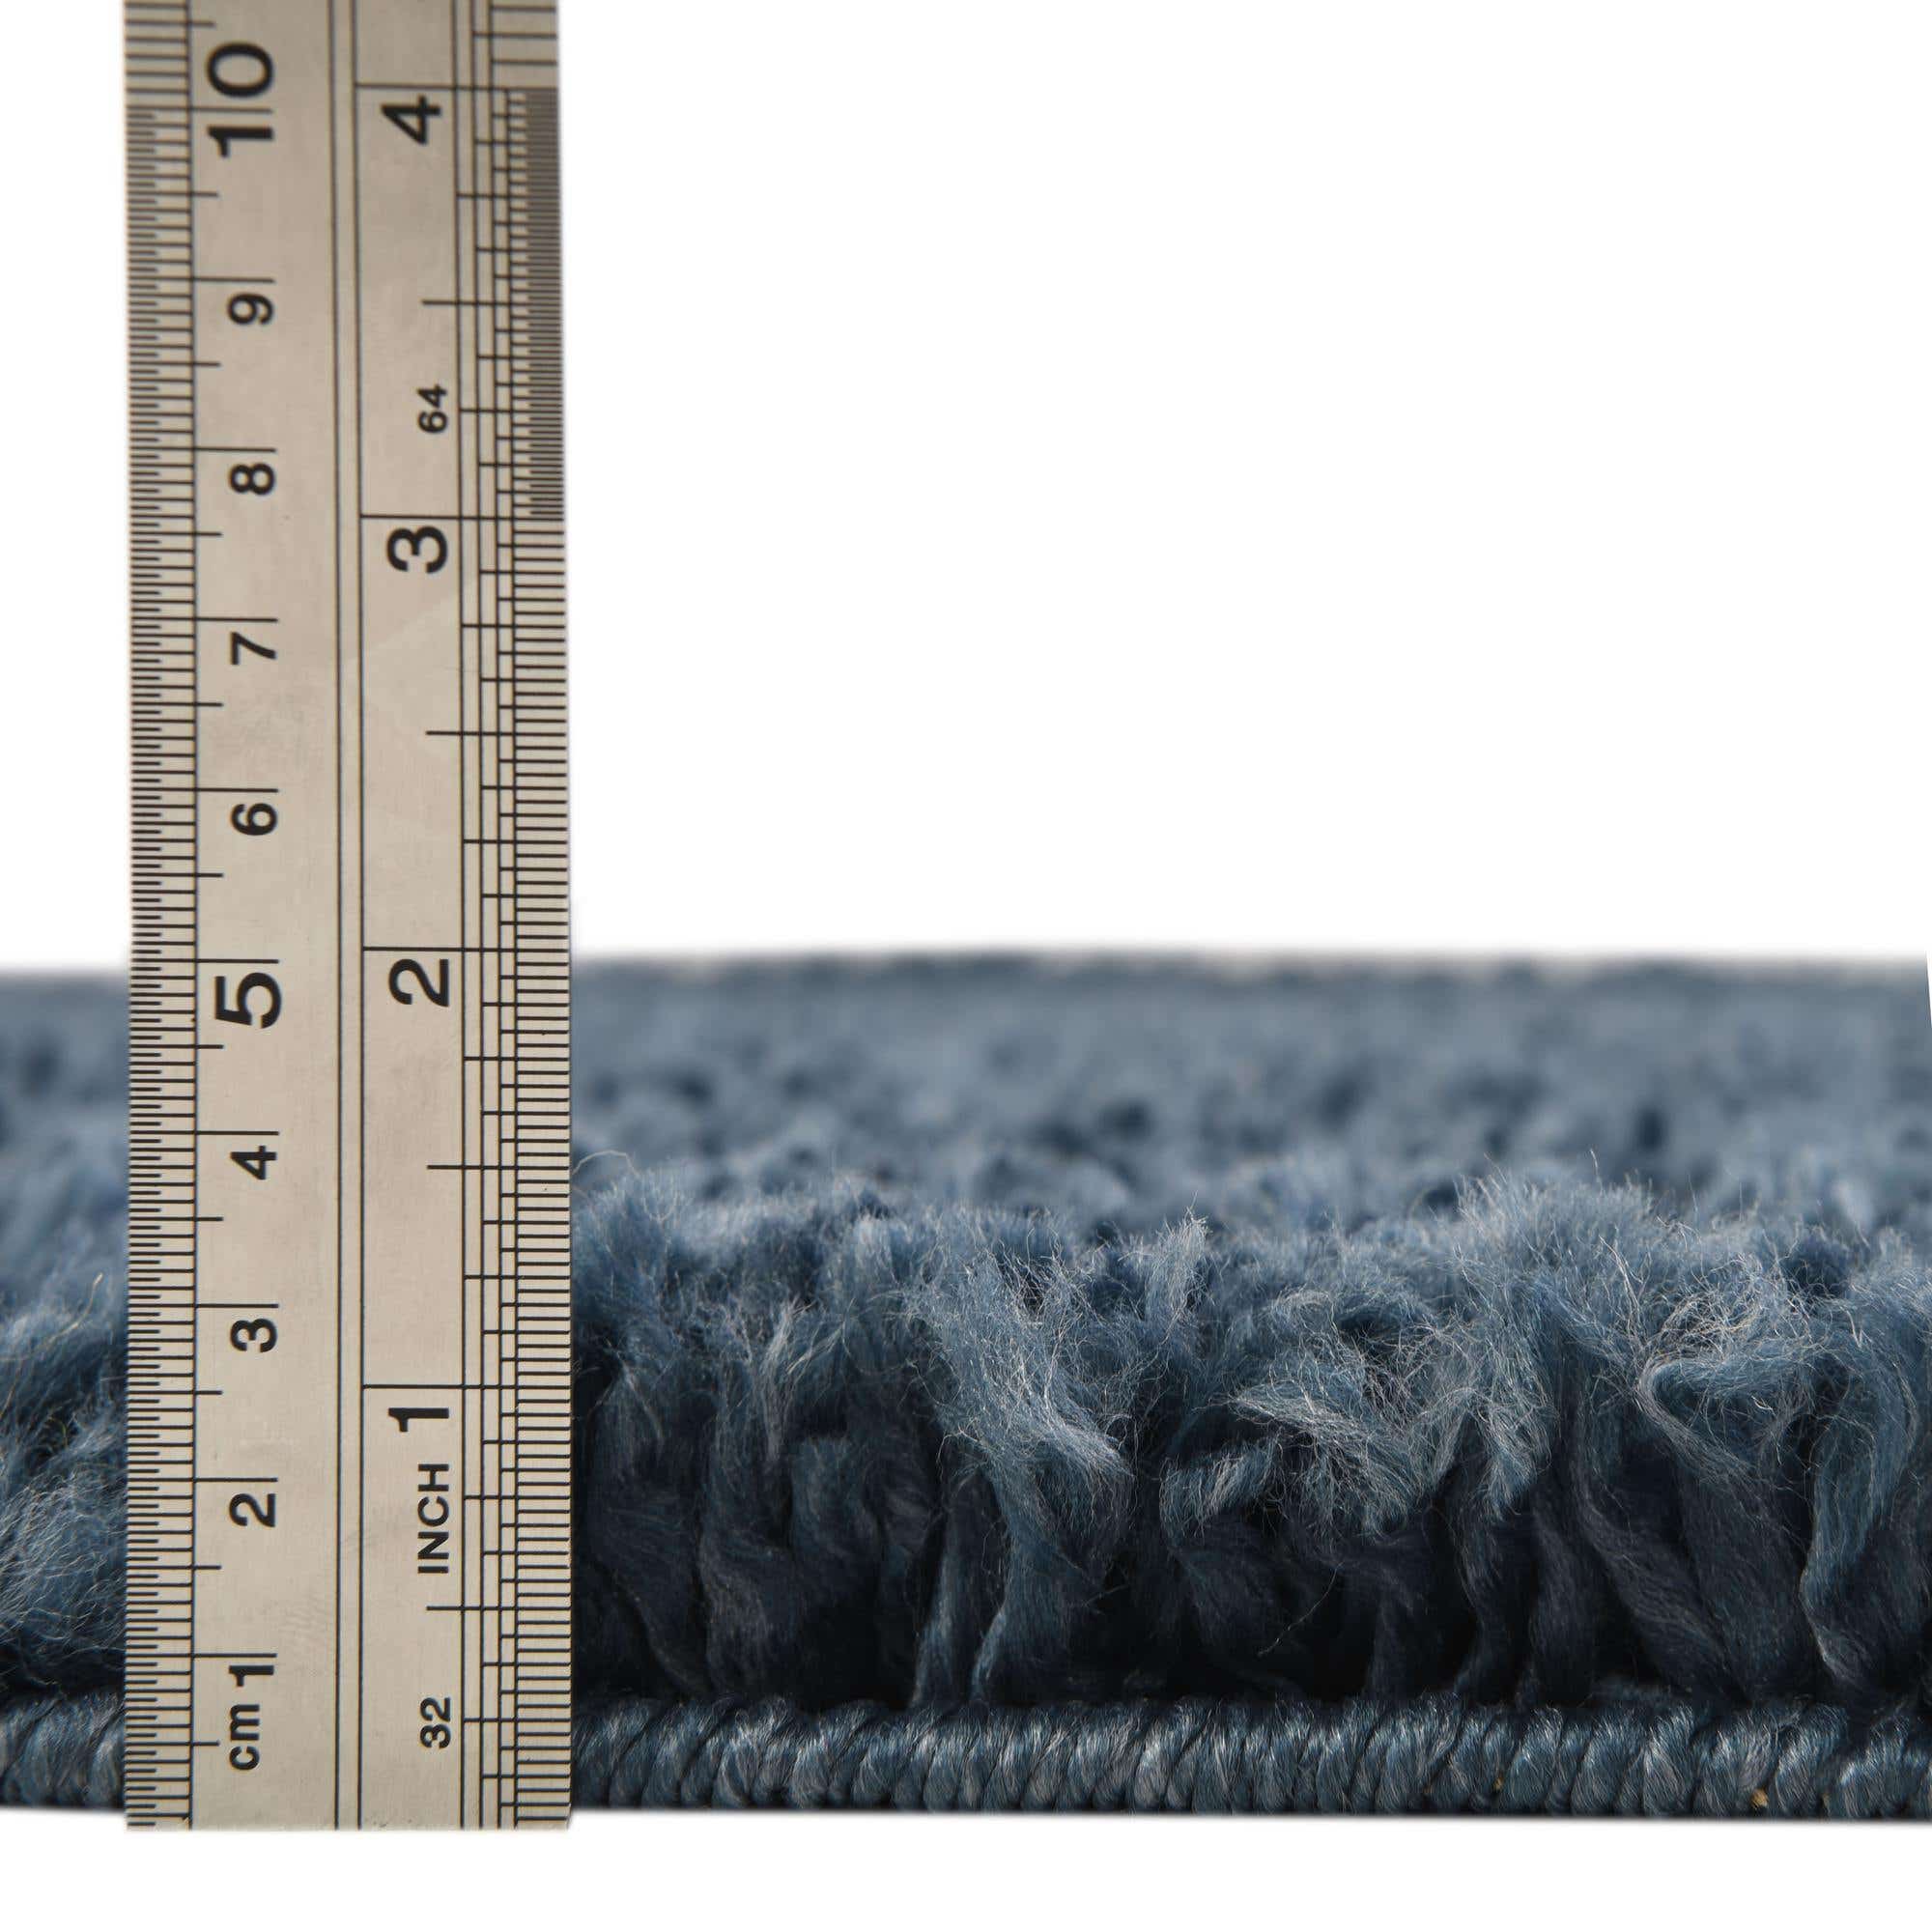 Unique Loom Davos Shag Rug Marine Blue 10' Square Solid Comfort Perfect For Dining Room Living Room Bed Room Kids Room - image 4 of 8